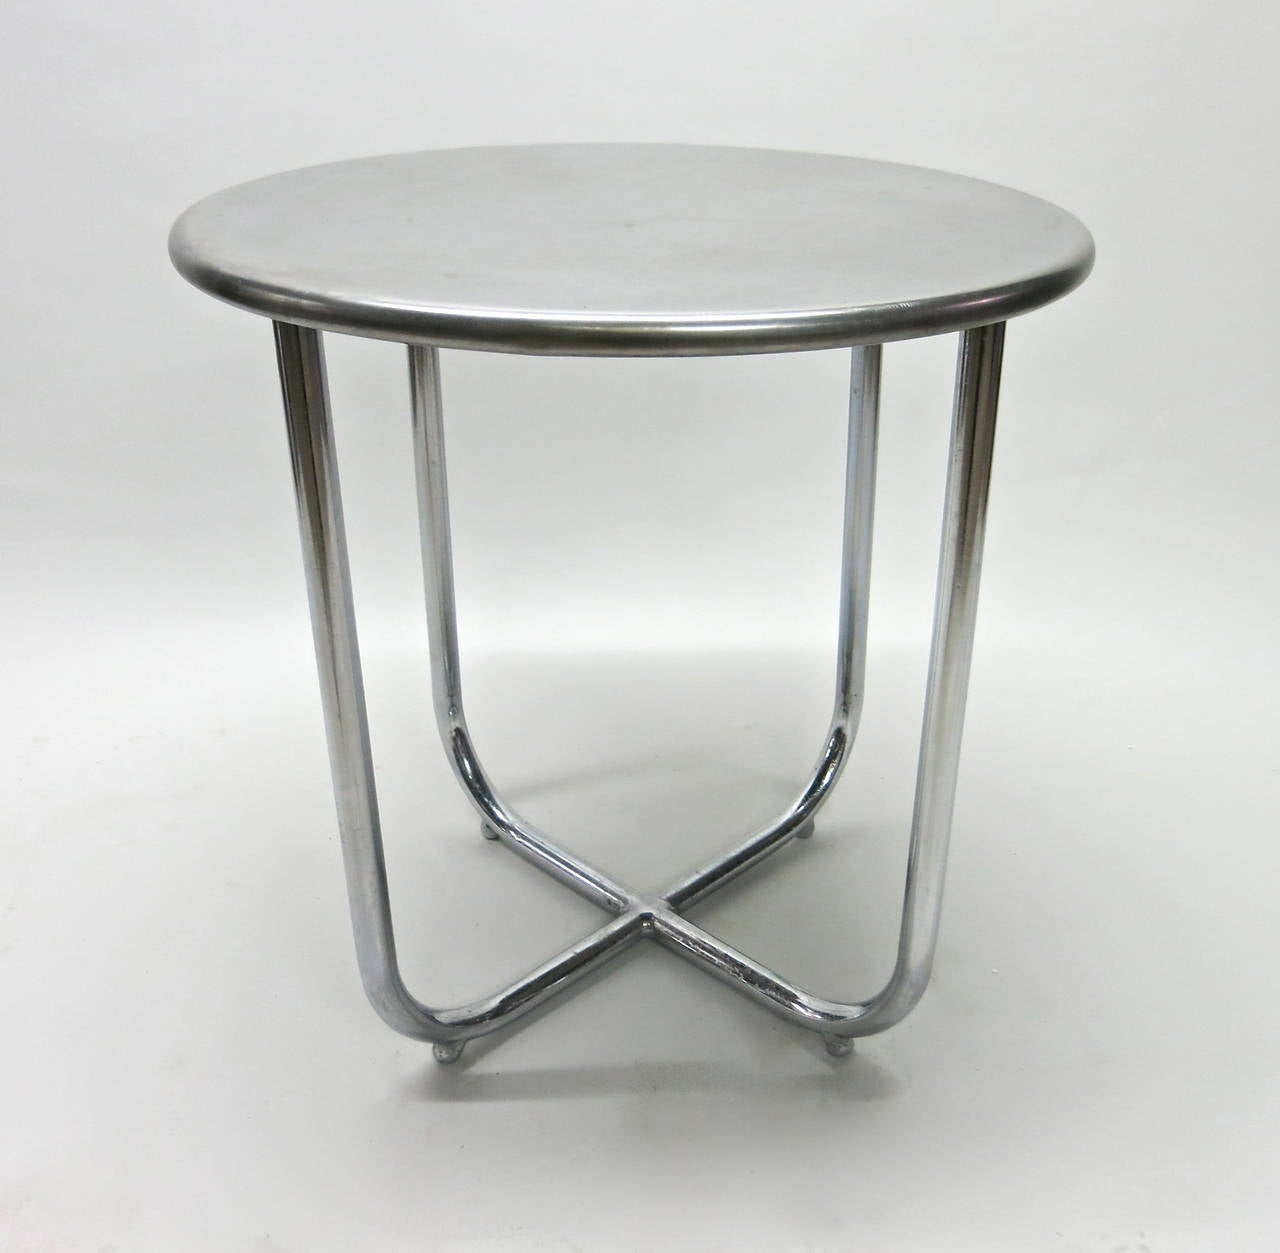 Table with a brushed steel top with curved edges supported by four tubular steel legs that bend at the bottom and cross in the center. Each leg has small foot positioned at the end of the curve.